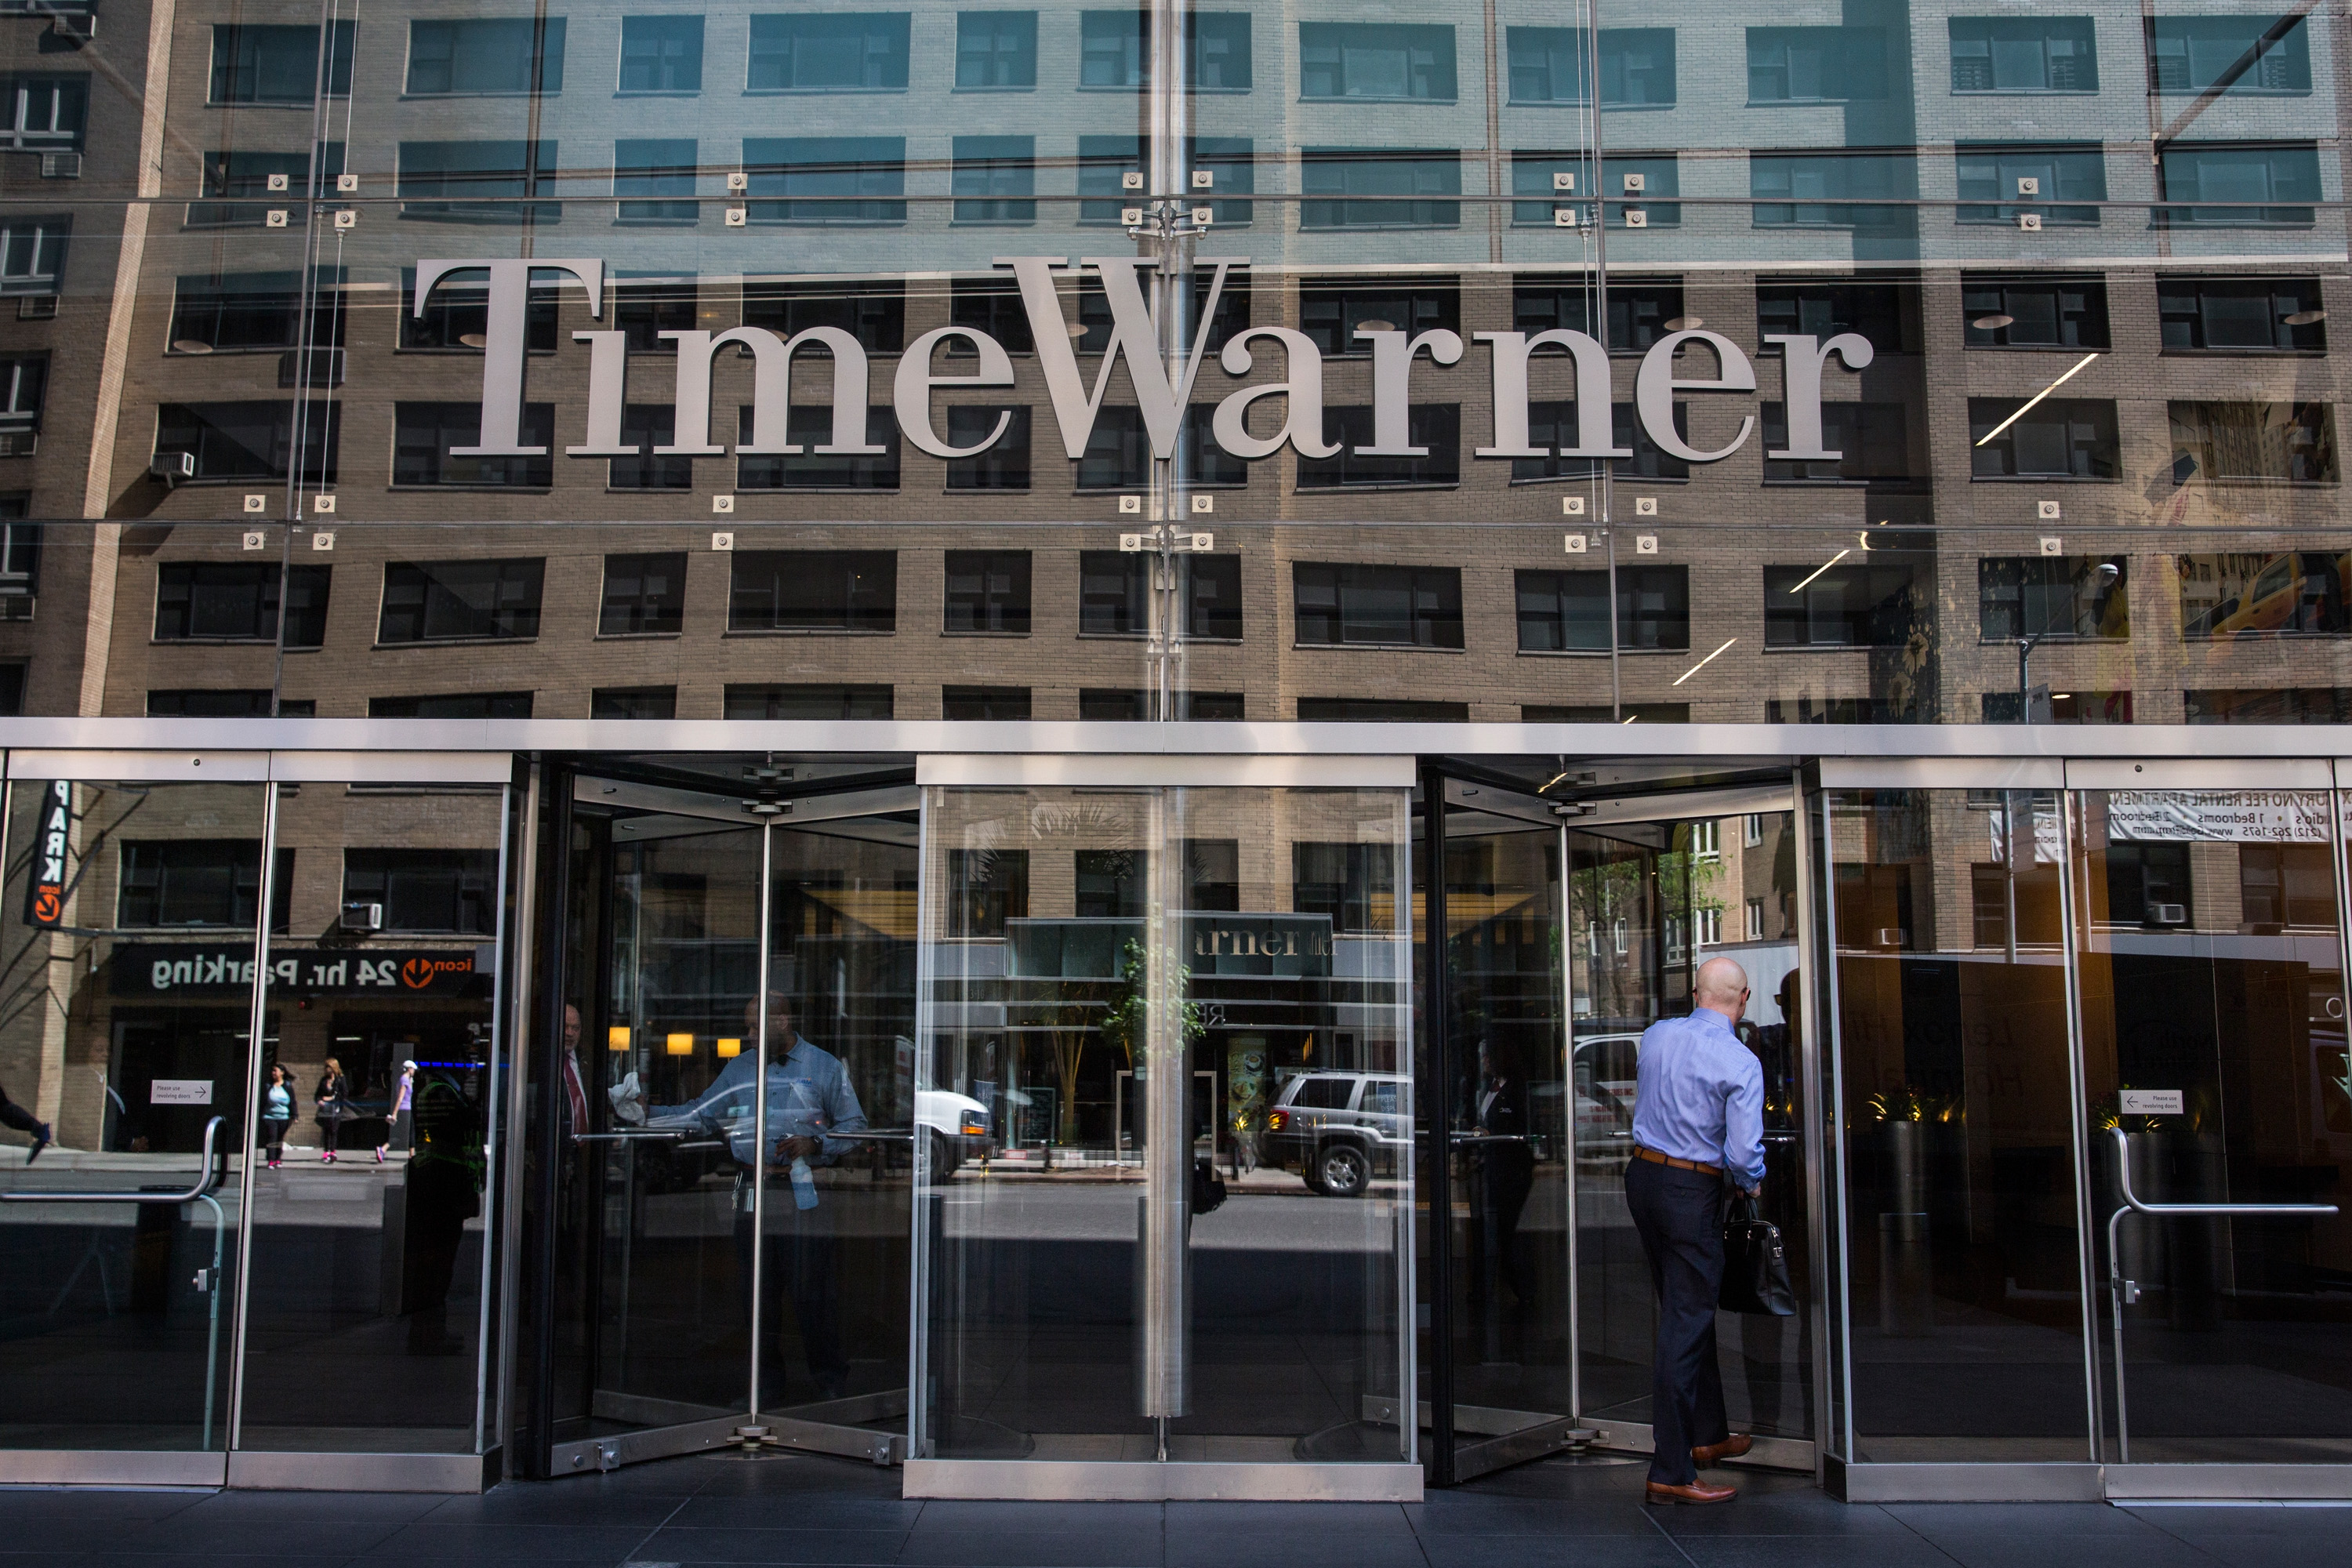 Charter Communications Buys Time Warner Cable In $79 Billion Deal